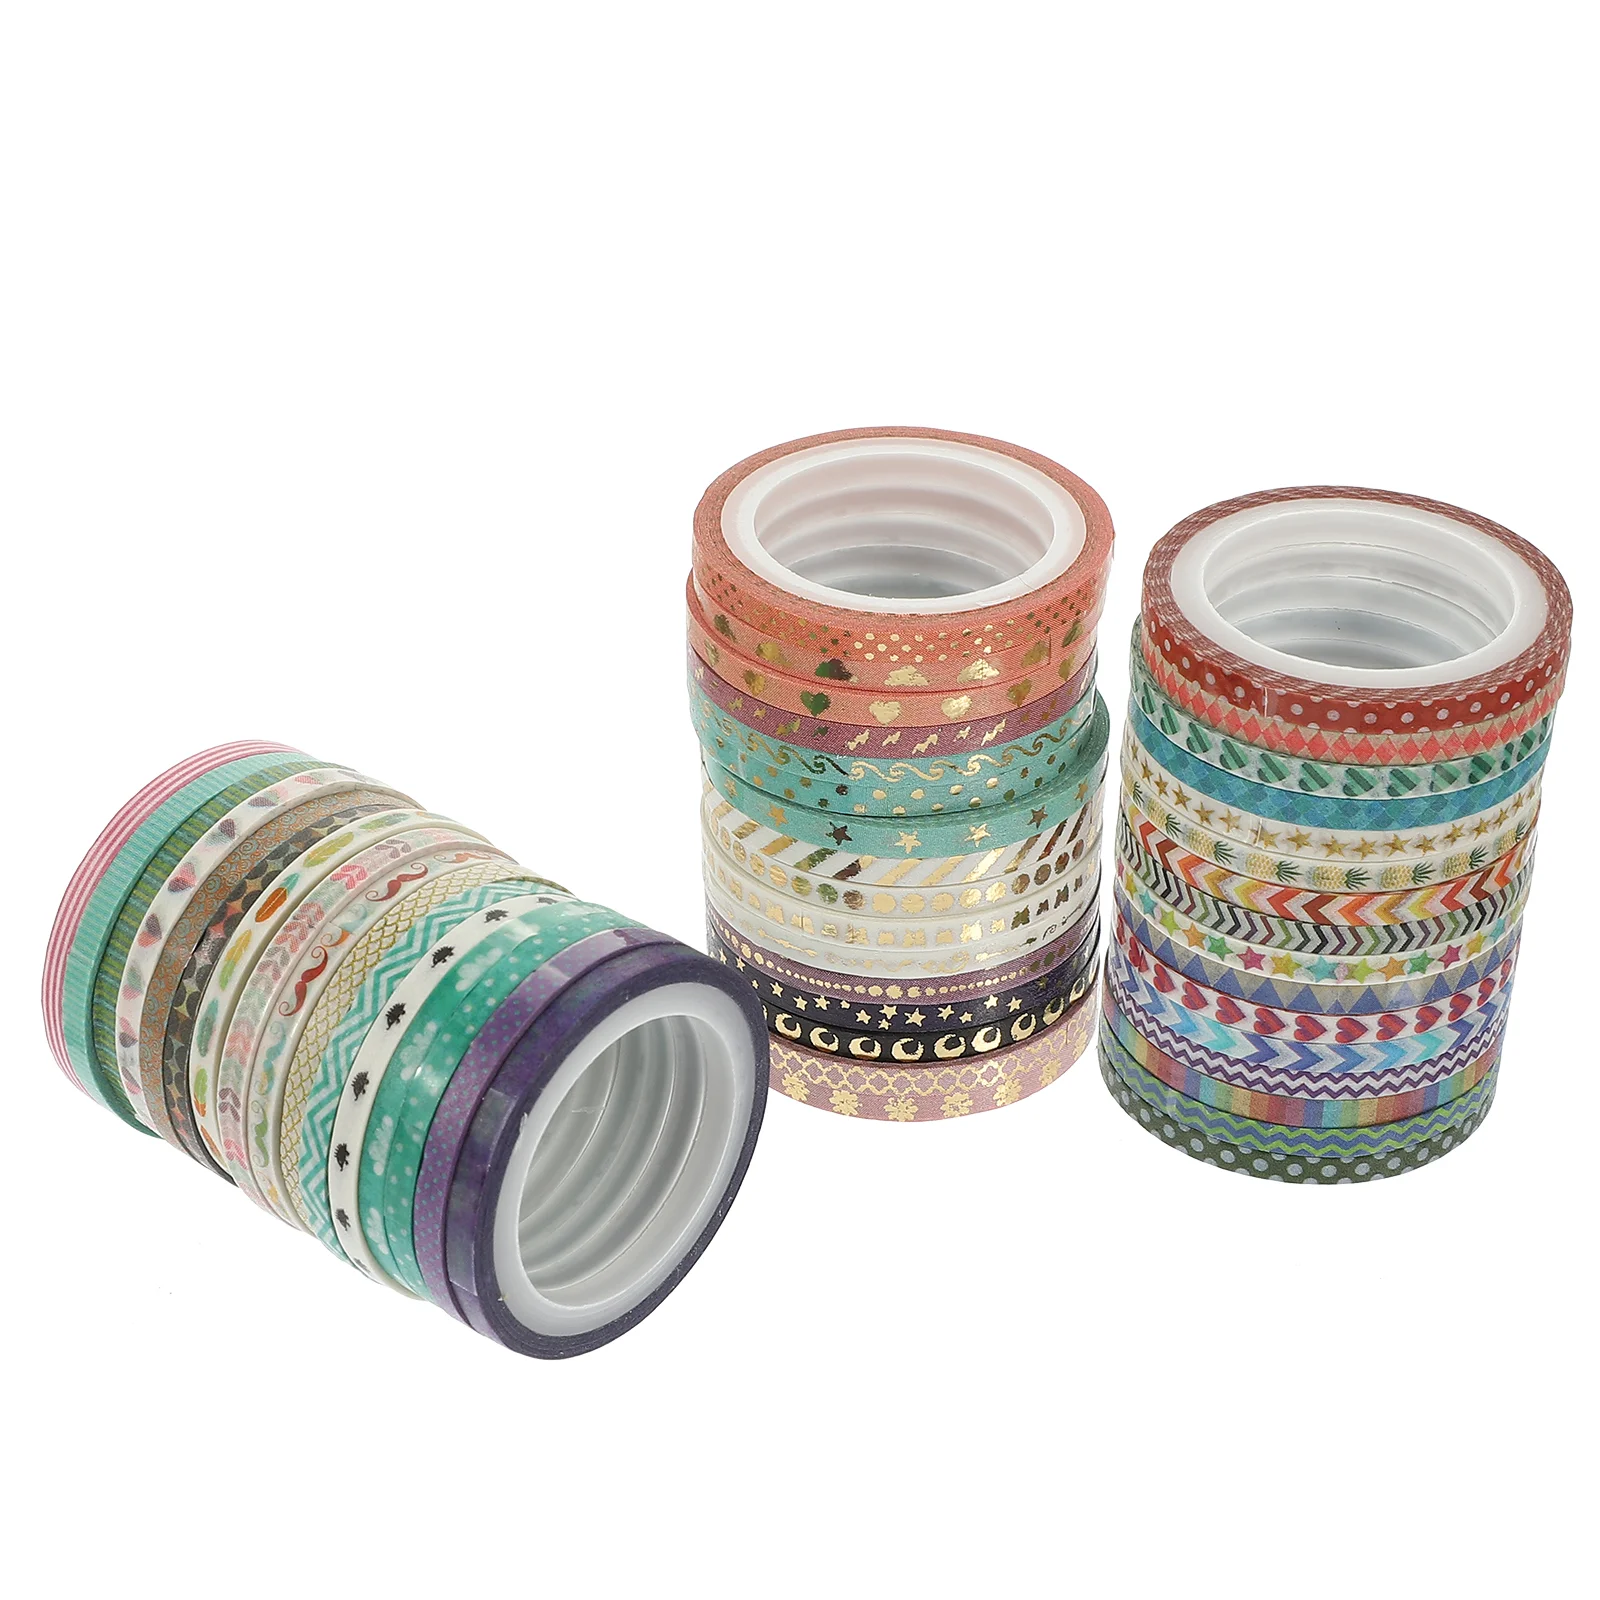 

48 Rolls Scrapbook Tapes Gift Wrapping Decorative Washi Crafts Printed Adhesive Making Stickers Planner Paper